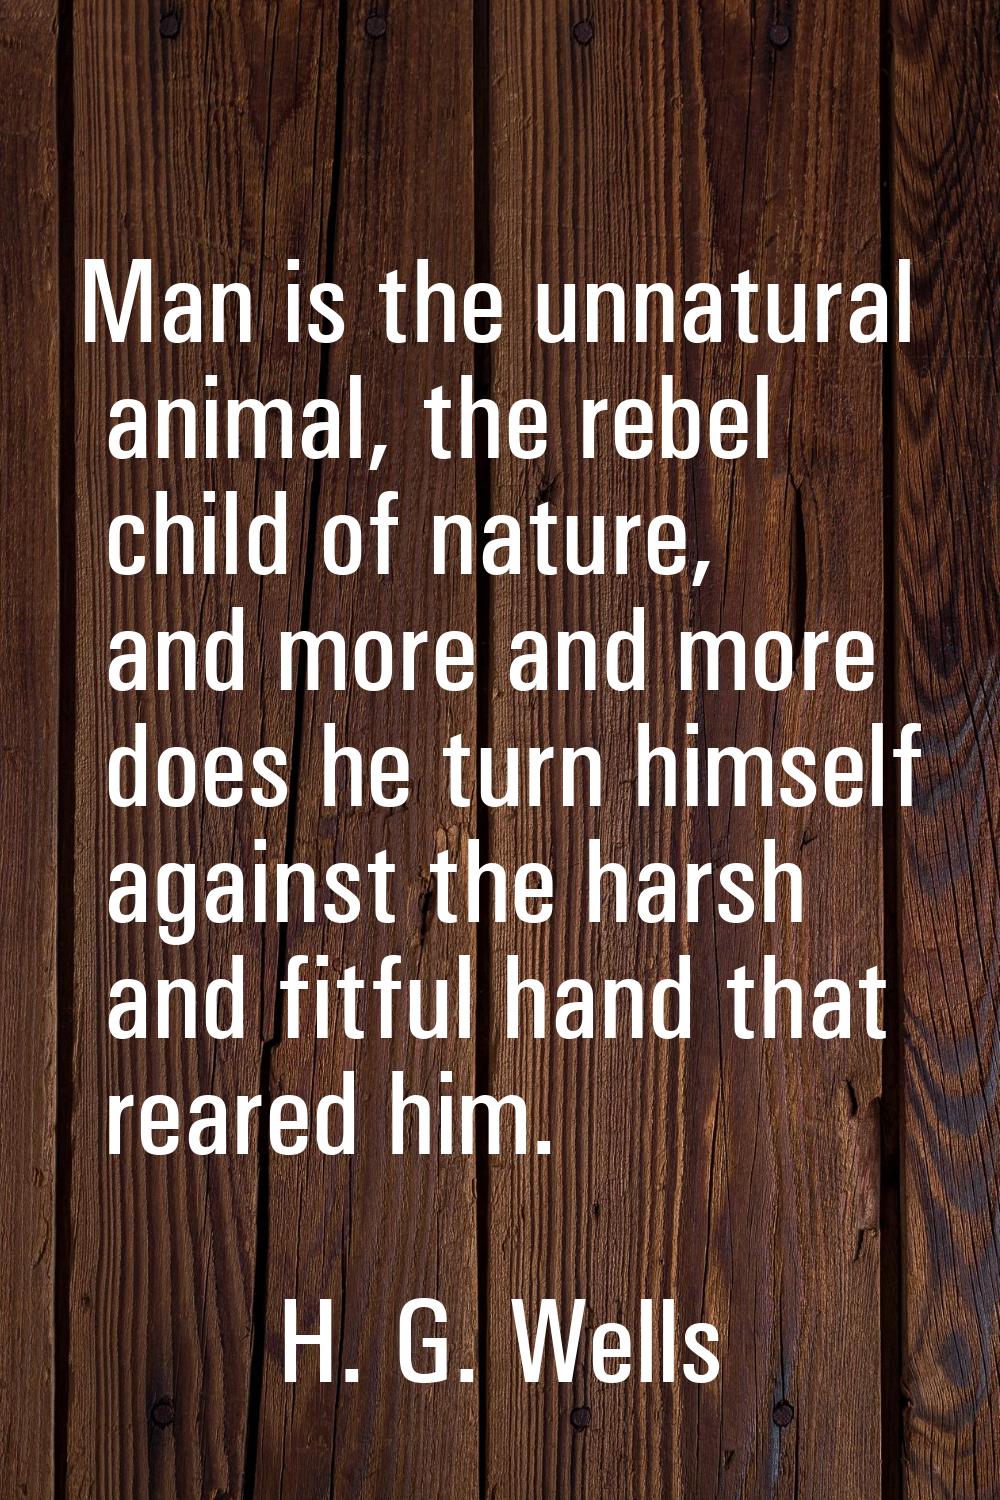 Man is the unnatural animal, the rebel child of nature, and more and more does he turn himself agai